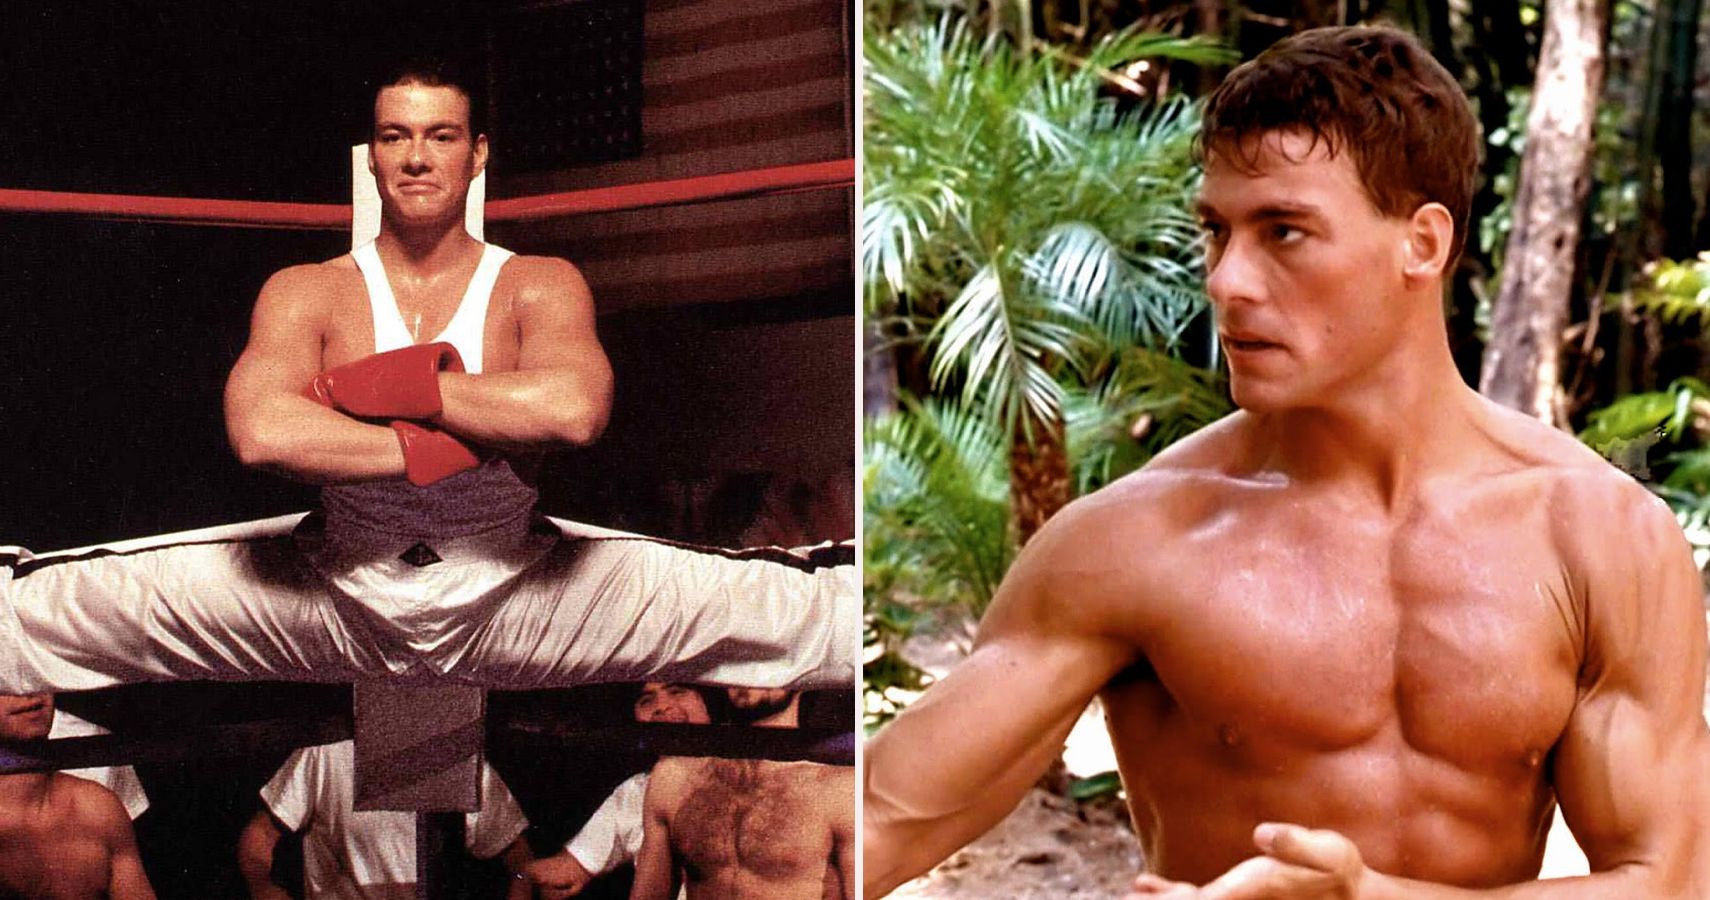 Van damme had lived in nigeria for a while and was married to a nigerian wo...